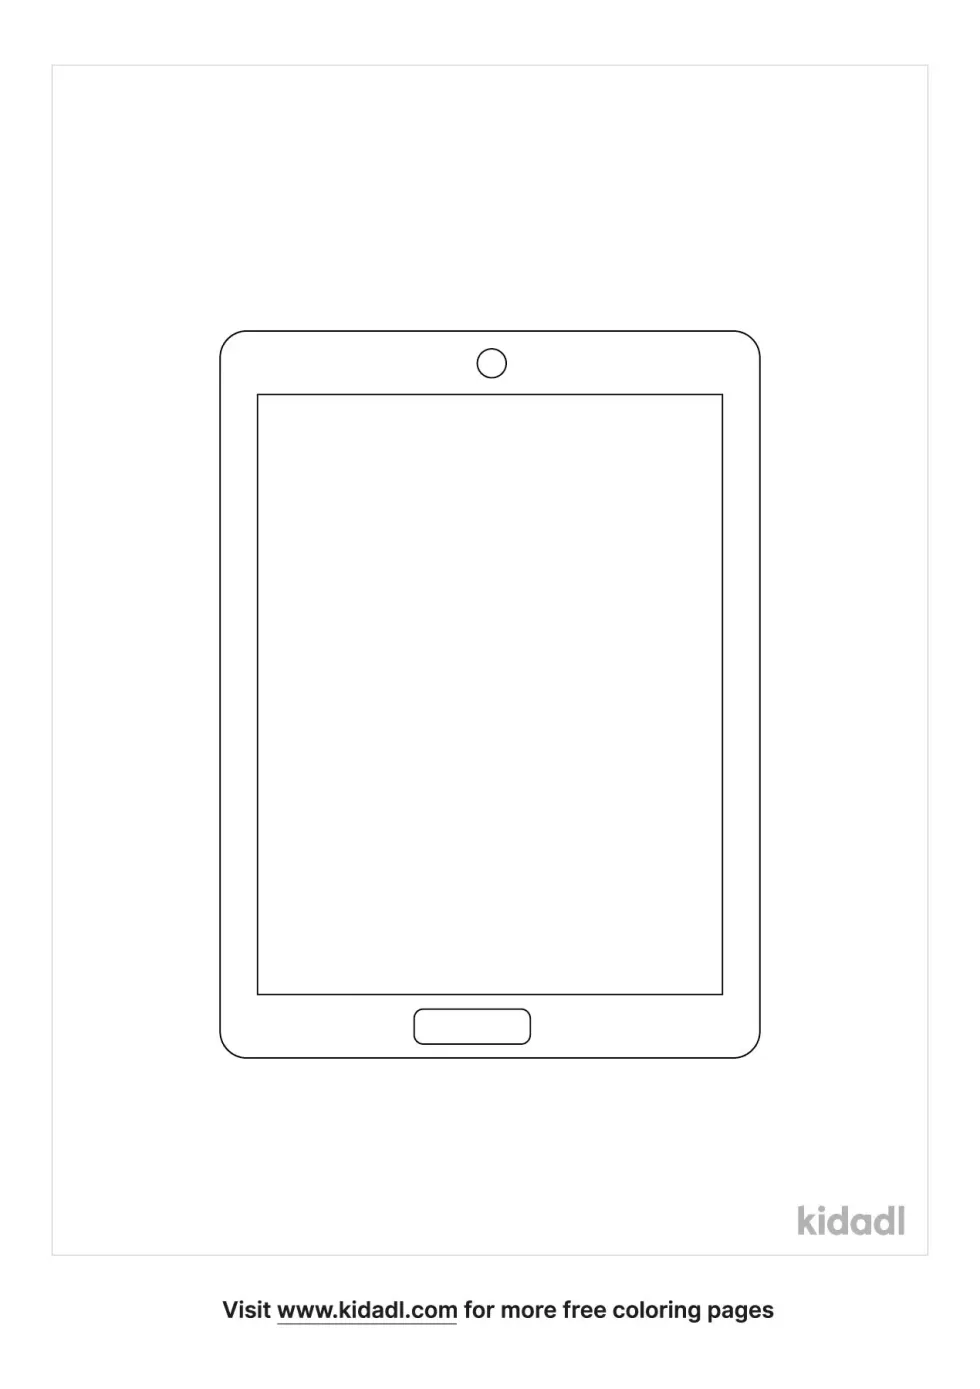 Tablet Coloring Page